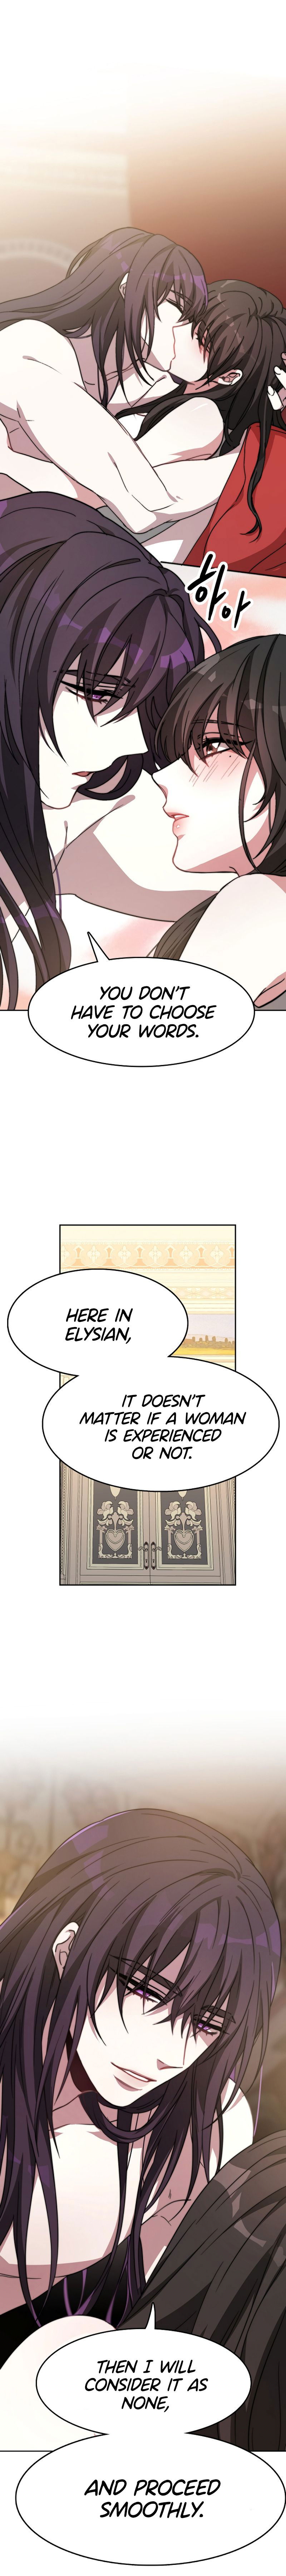 Elysian's Bride Chapter 1 page 27